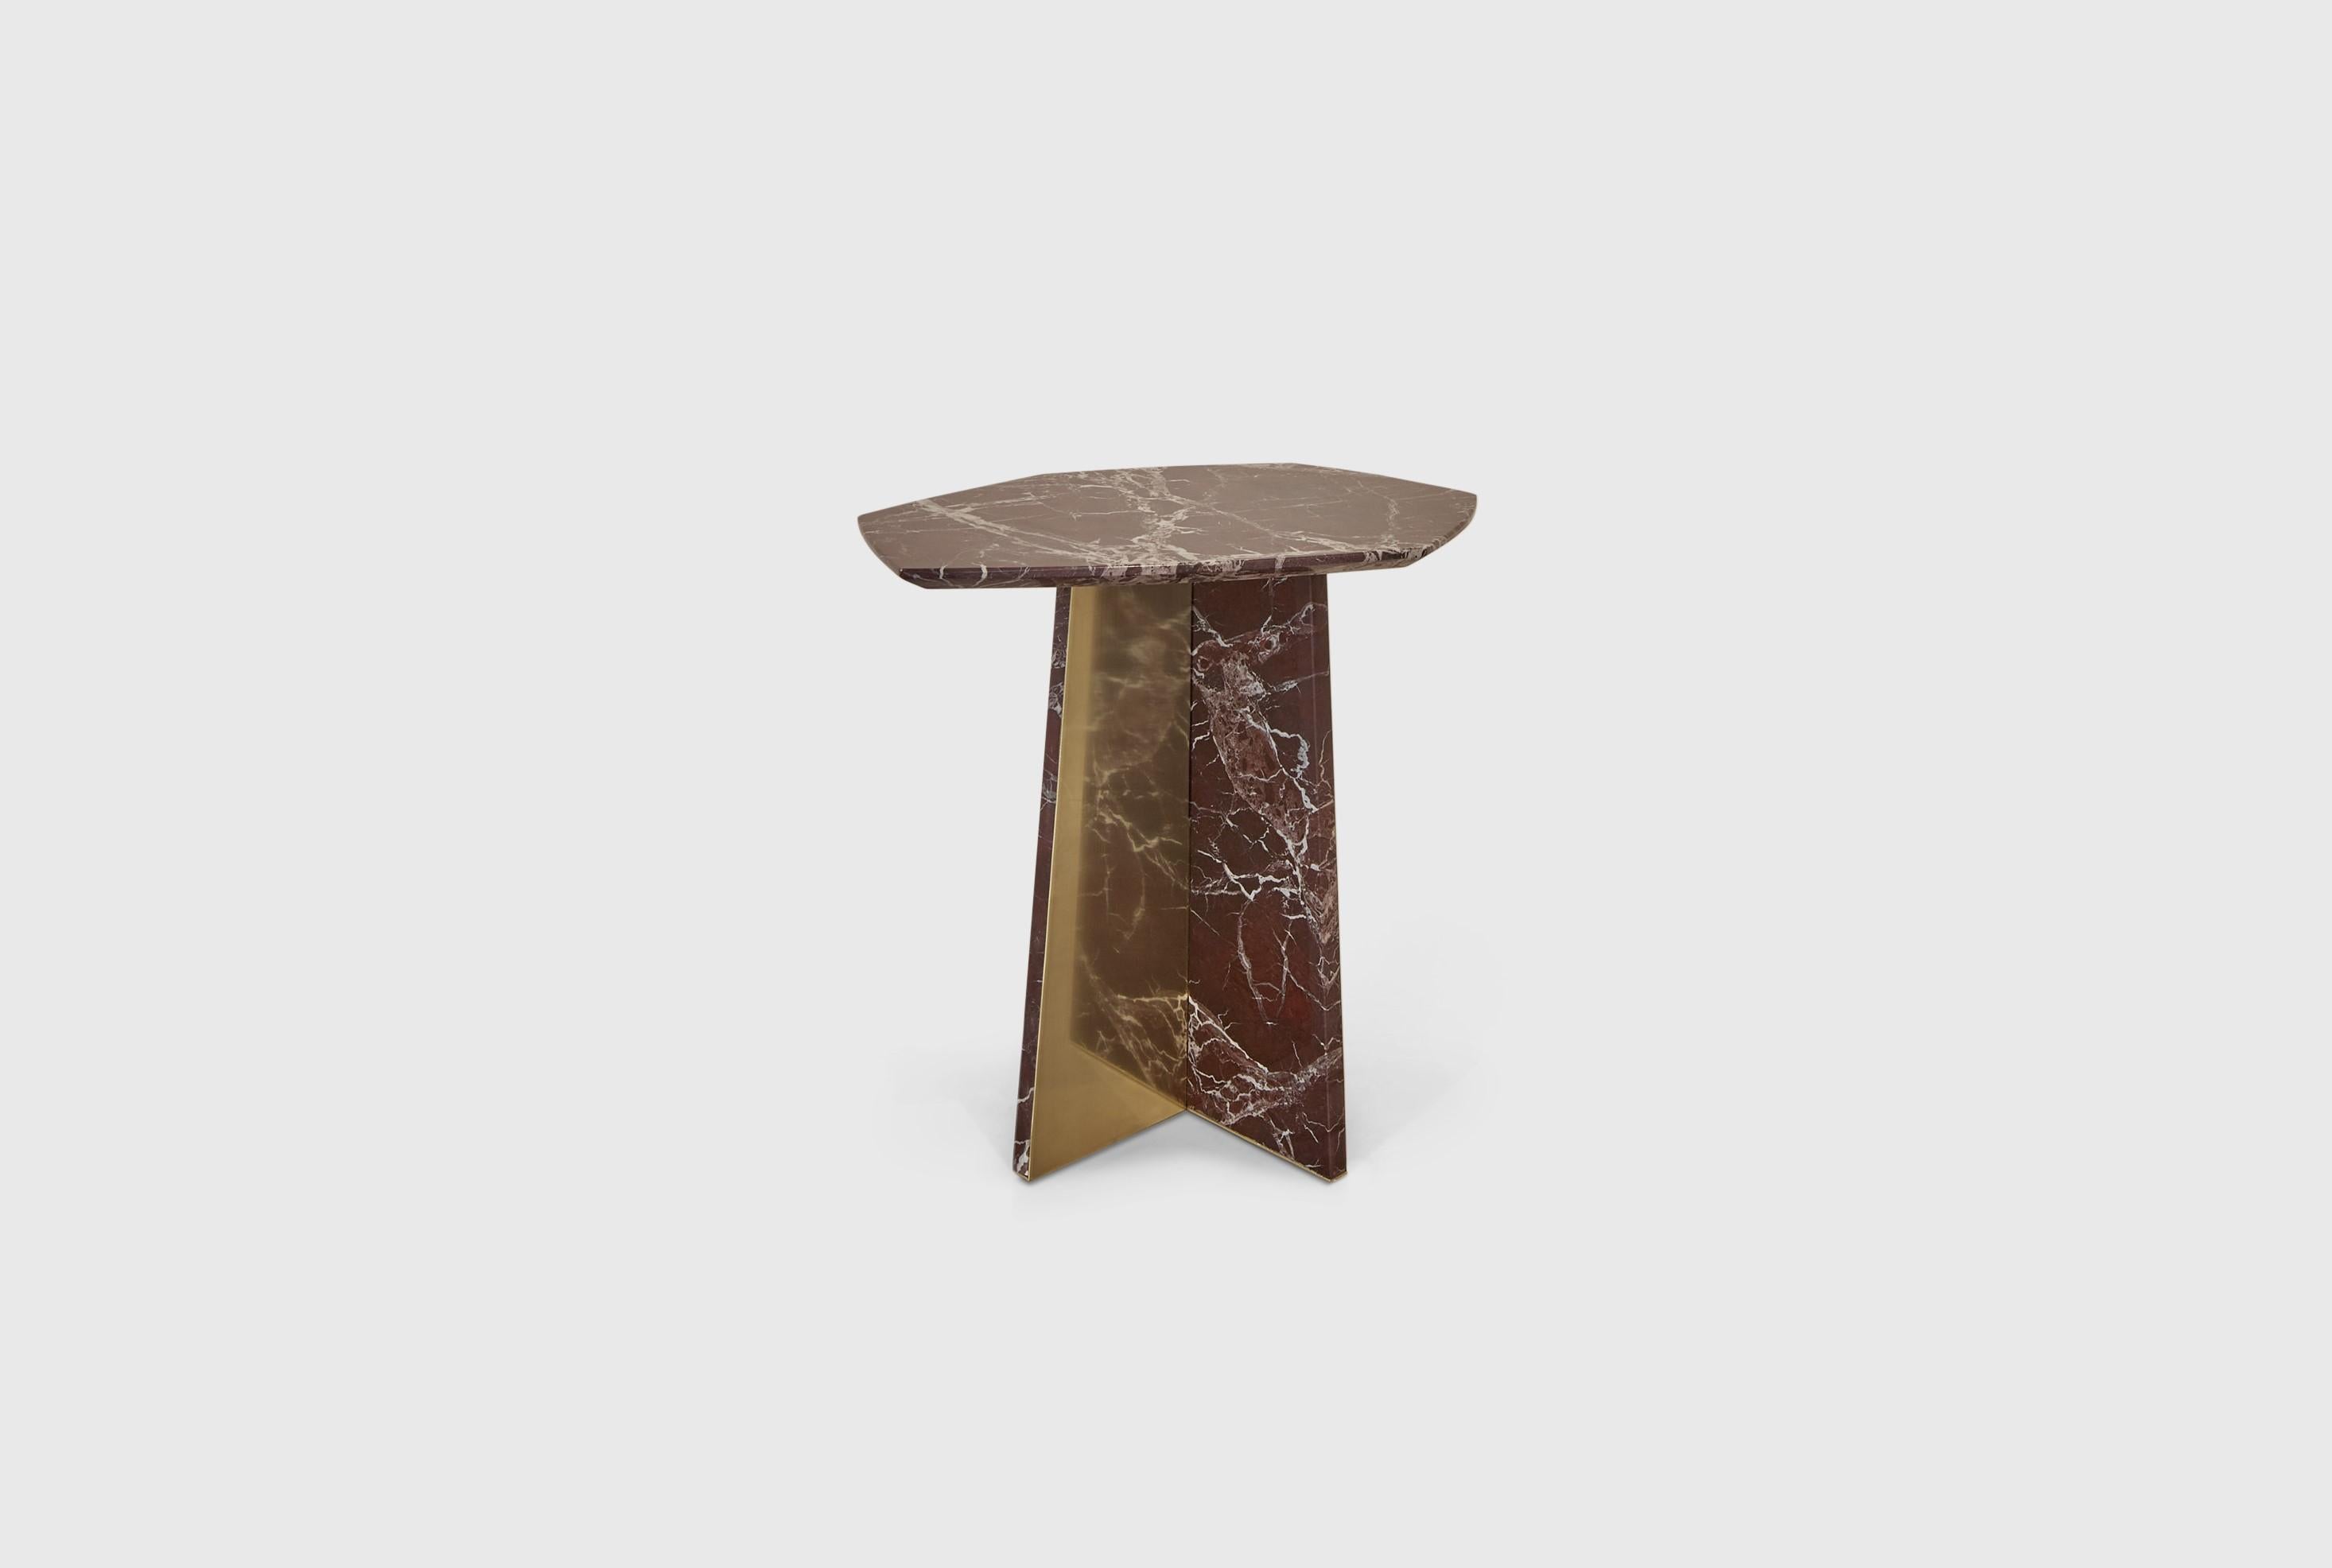 Medium Geometrik marble side table by Atra Design.
Dimensions: D 45 x W 36.5 x H 45 cm.
Materials: marble, brass.
Other marbles and brass finishes available.

Atra Design
We are Atra, a furniture brand produced by Atra form a mexico city–based high